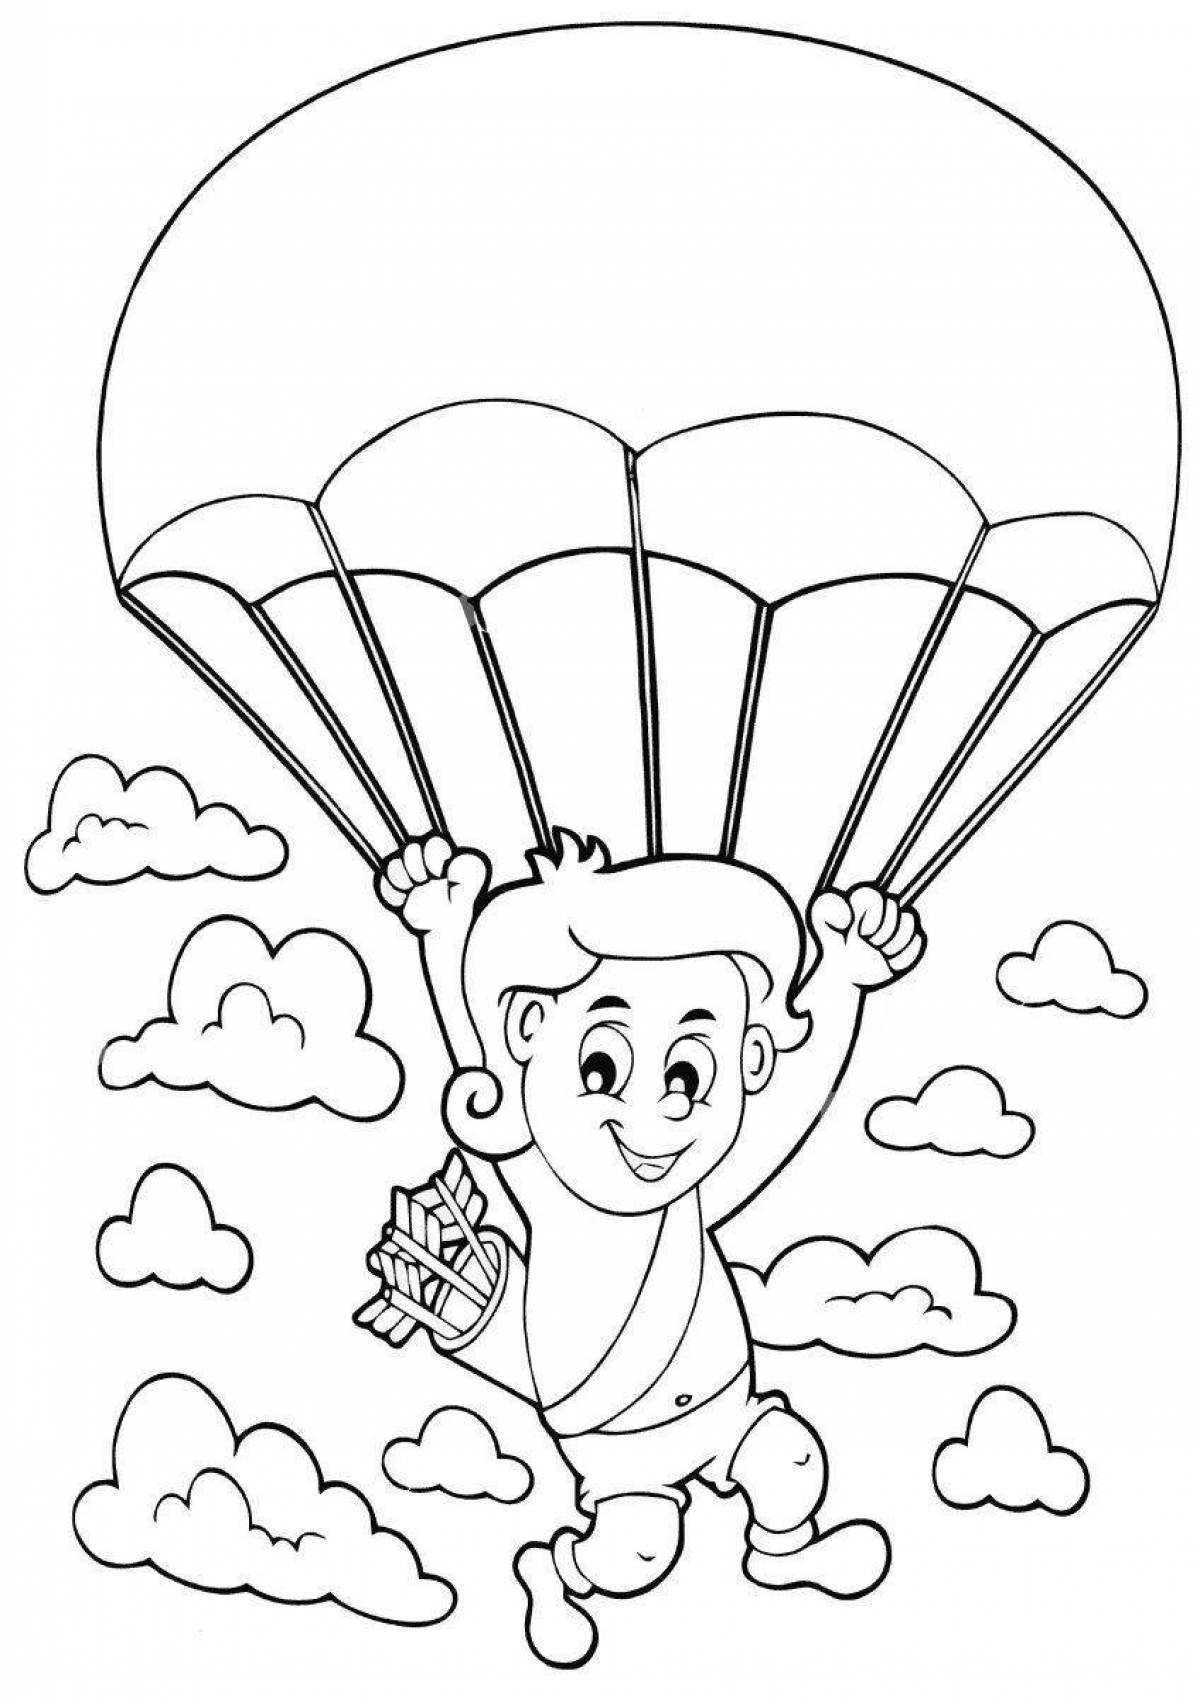 Exciting skydivers coloring page